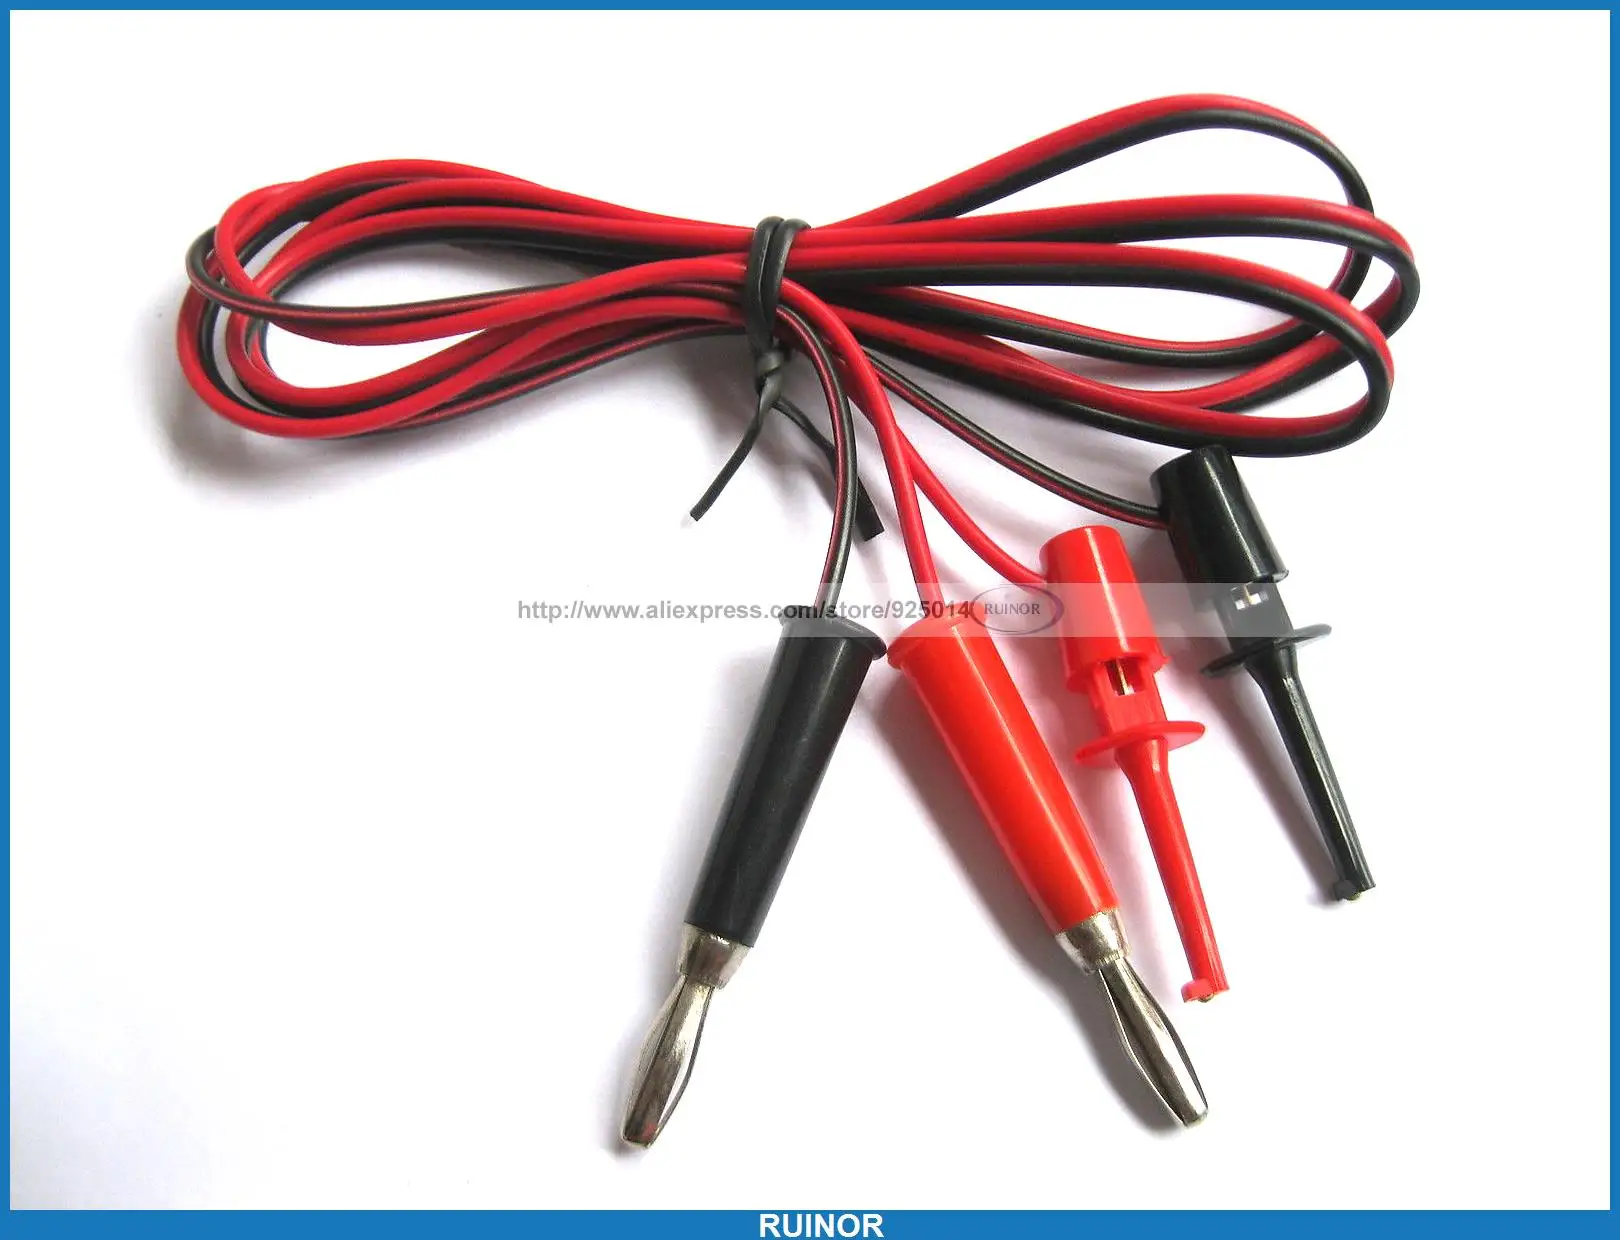 ФОТО 20 Set Small Test Hook Clip to Banana Plug Cable 1M 100cm Red Black 